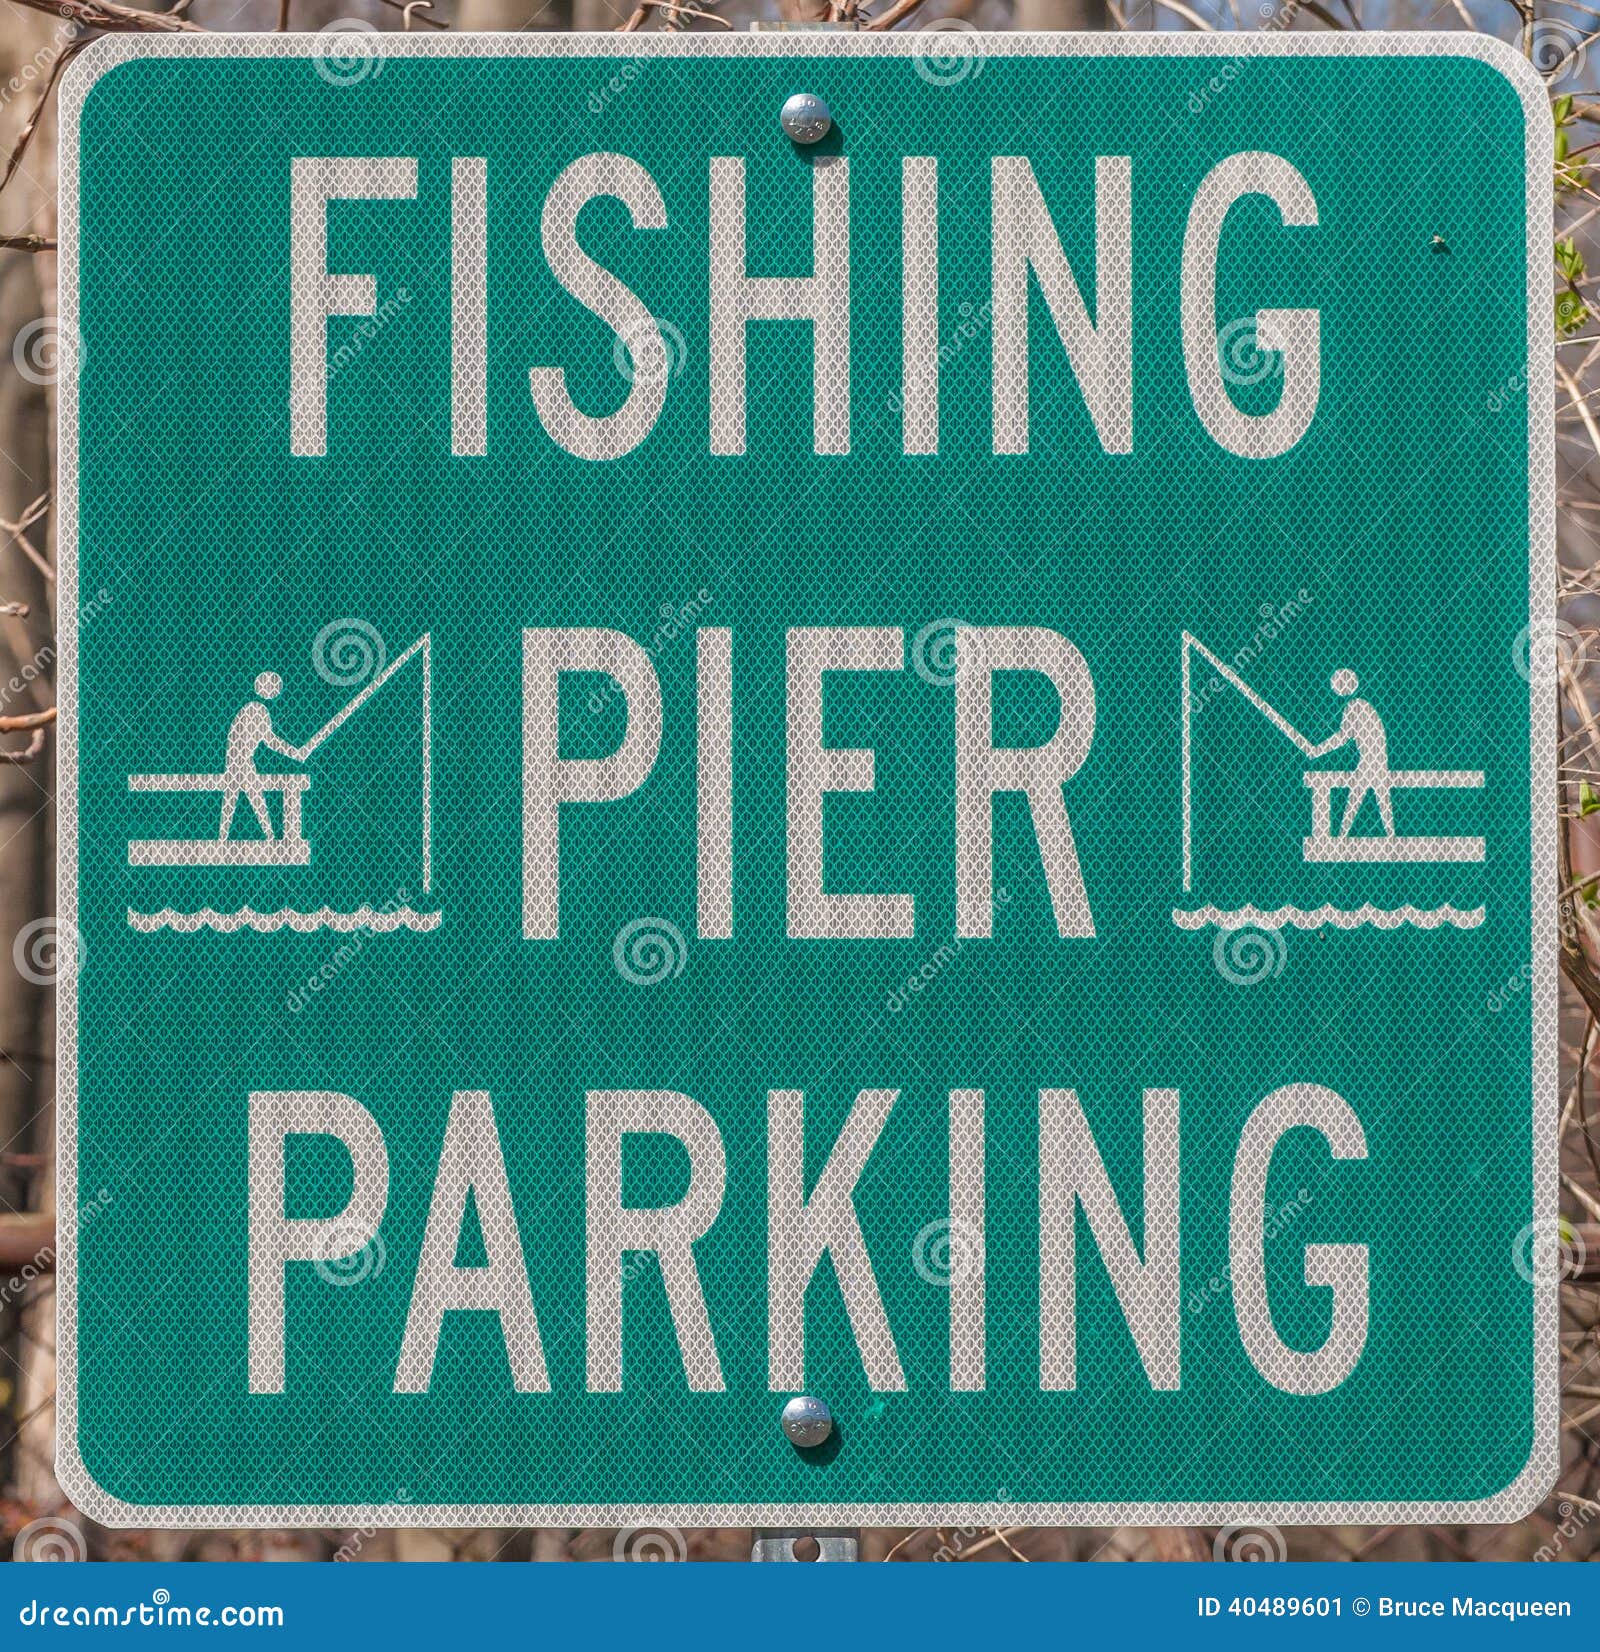 Fishing Parking Sign stock image. Image of direction 40489601